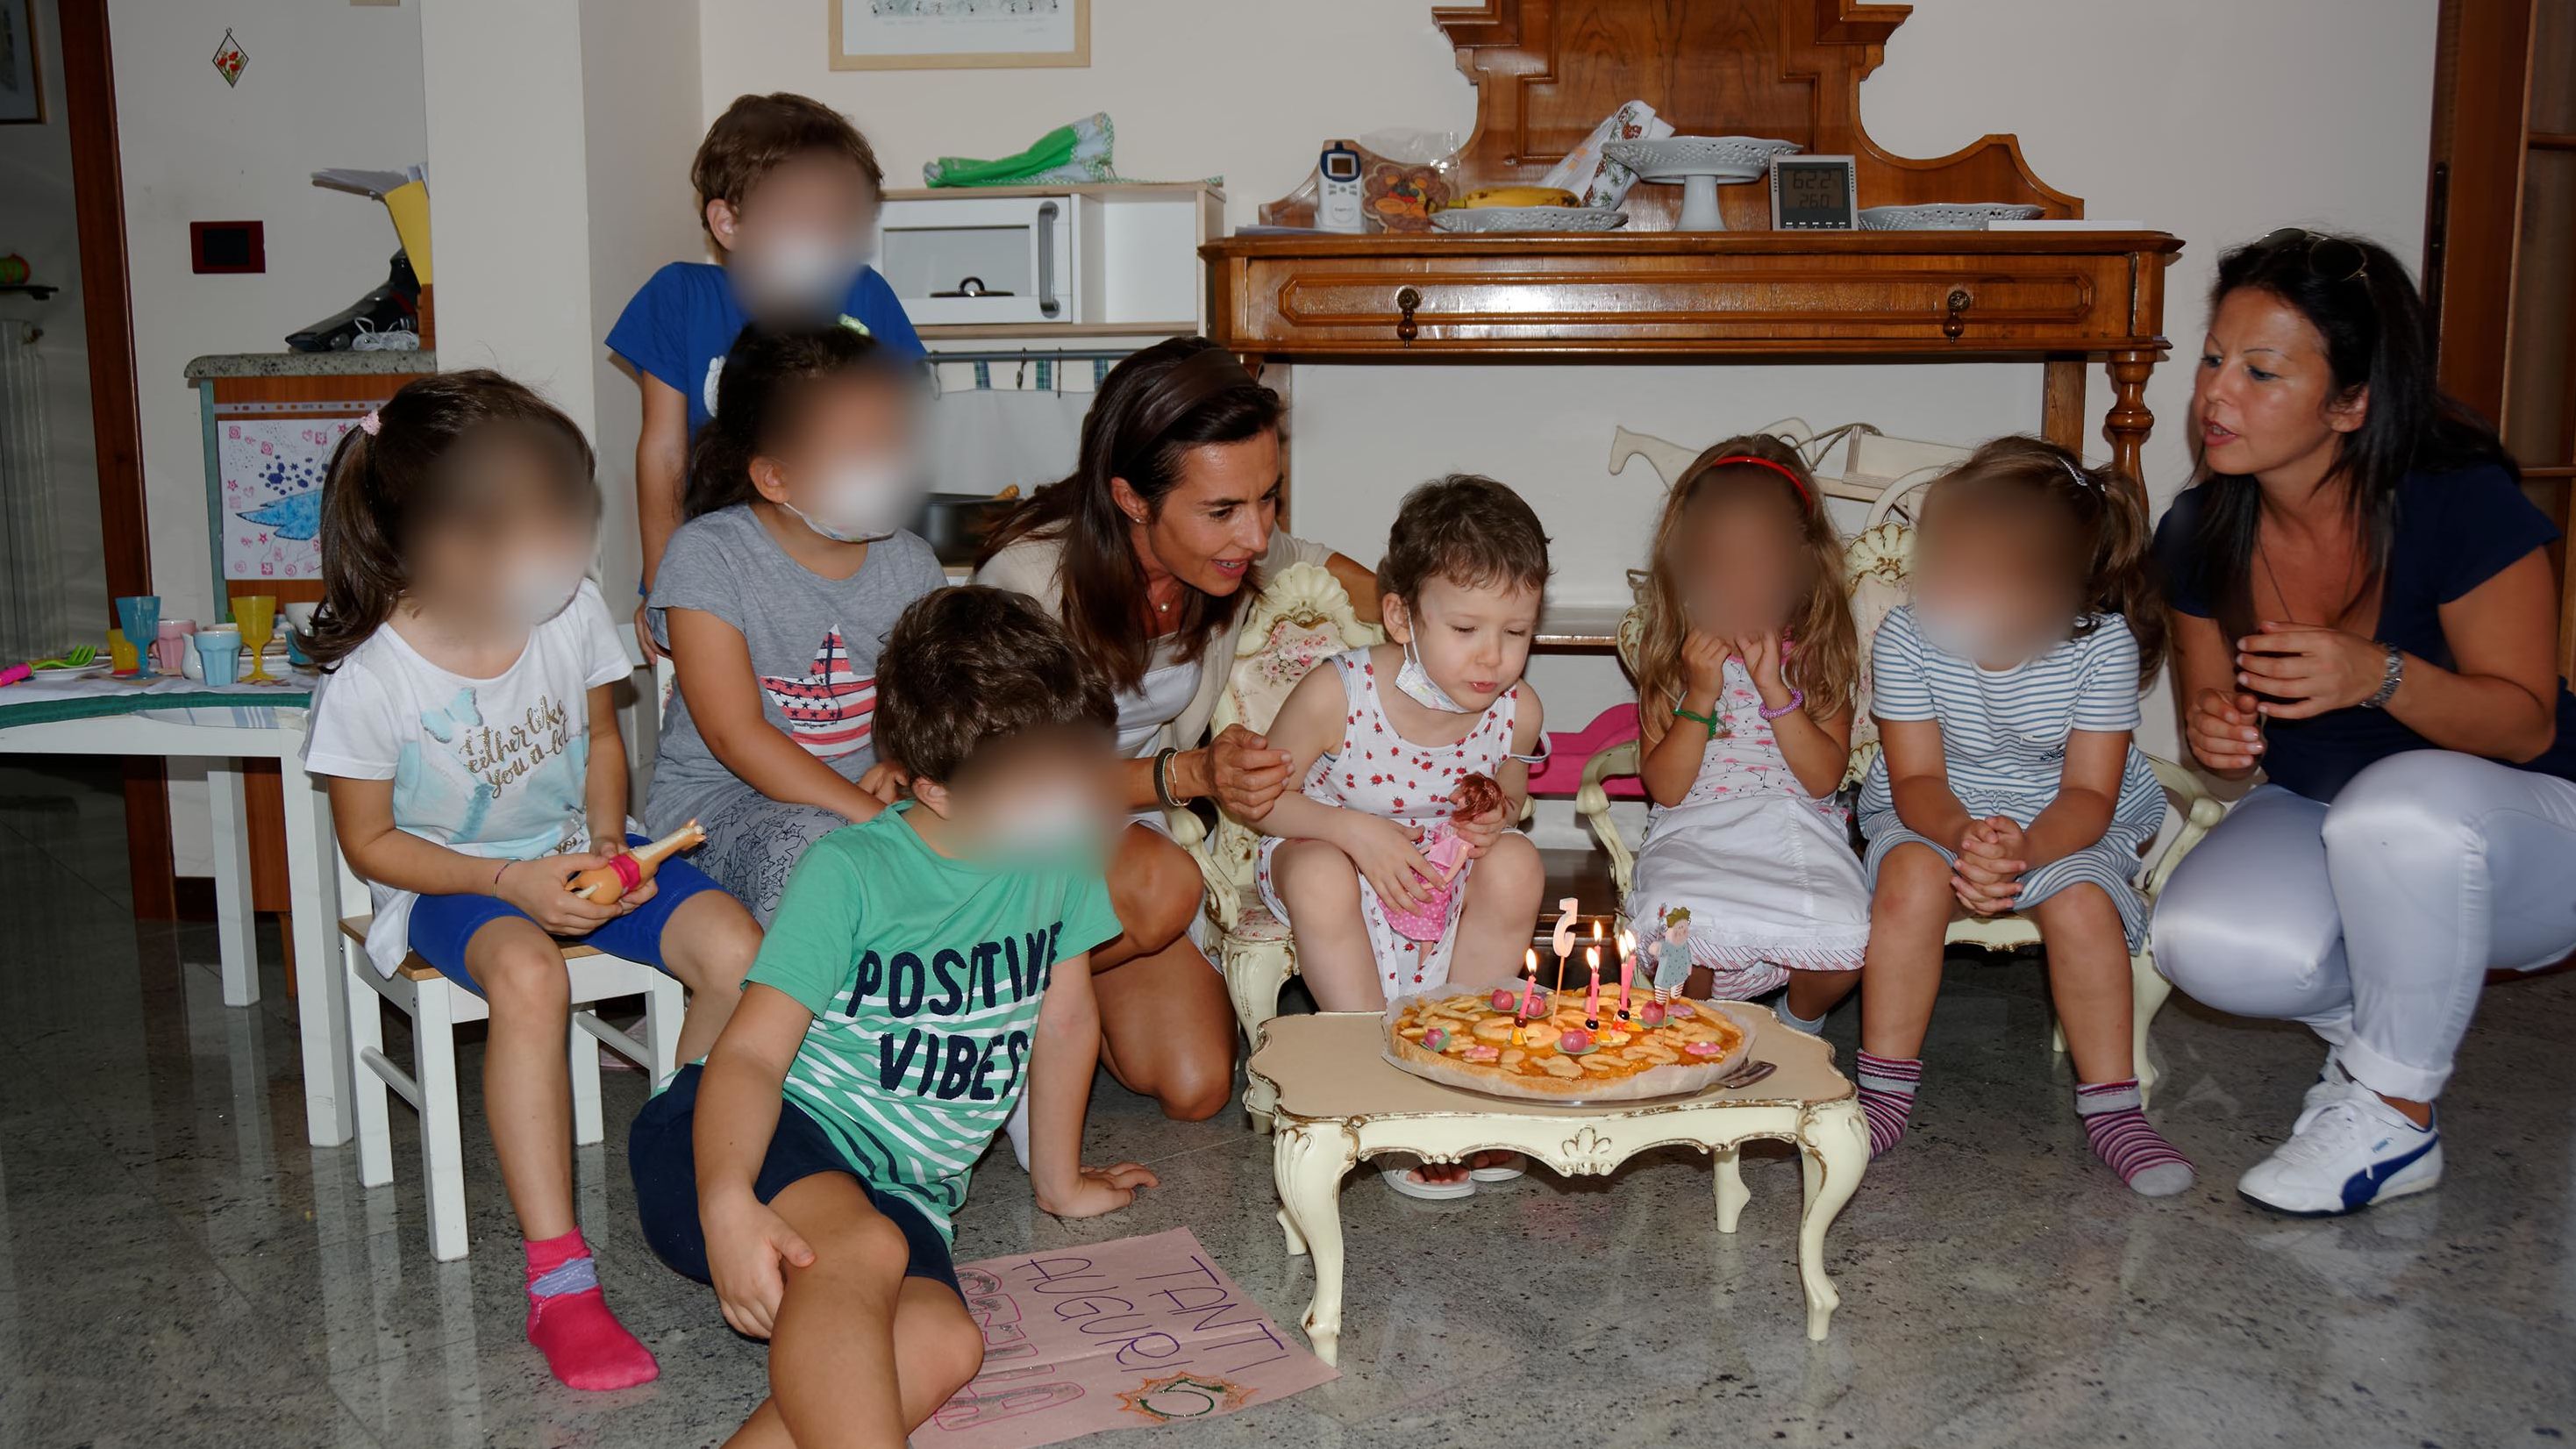 When it came to celebrating birthdays, Angela's friends had to wear masks to help keep her safe. CNN has blurred the faces of other children in the photo to protect their privacy.